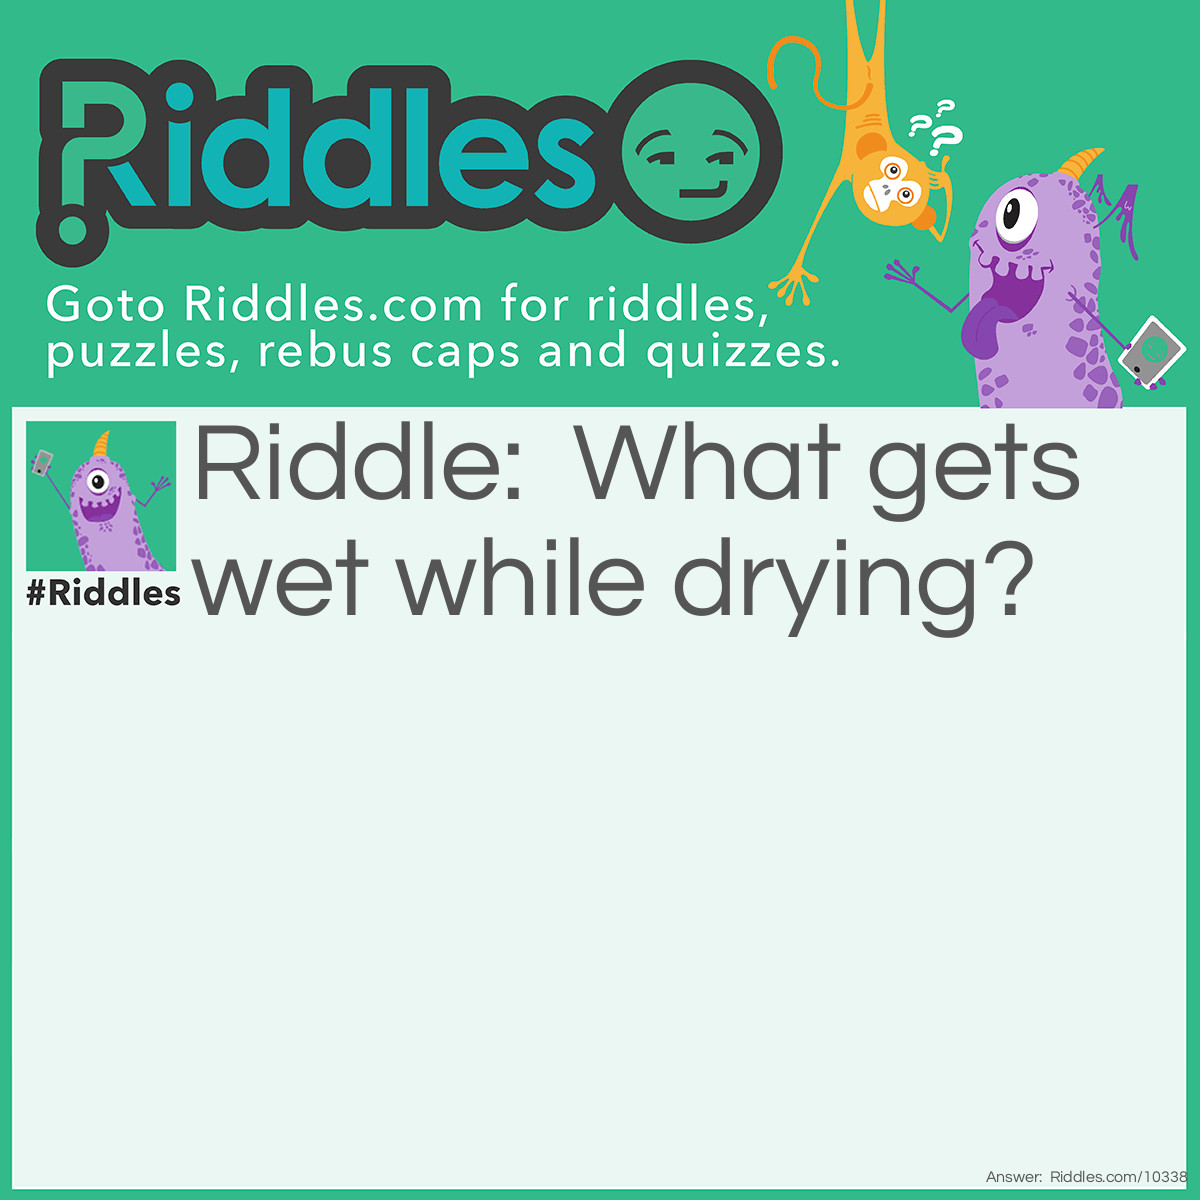 Riddle: What gets wet while drying? Answer: A towel